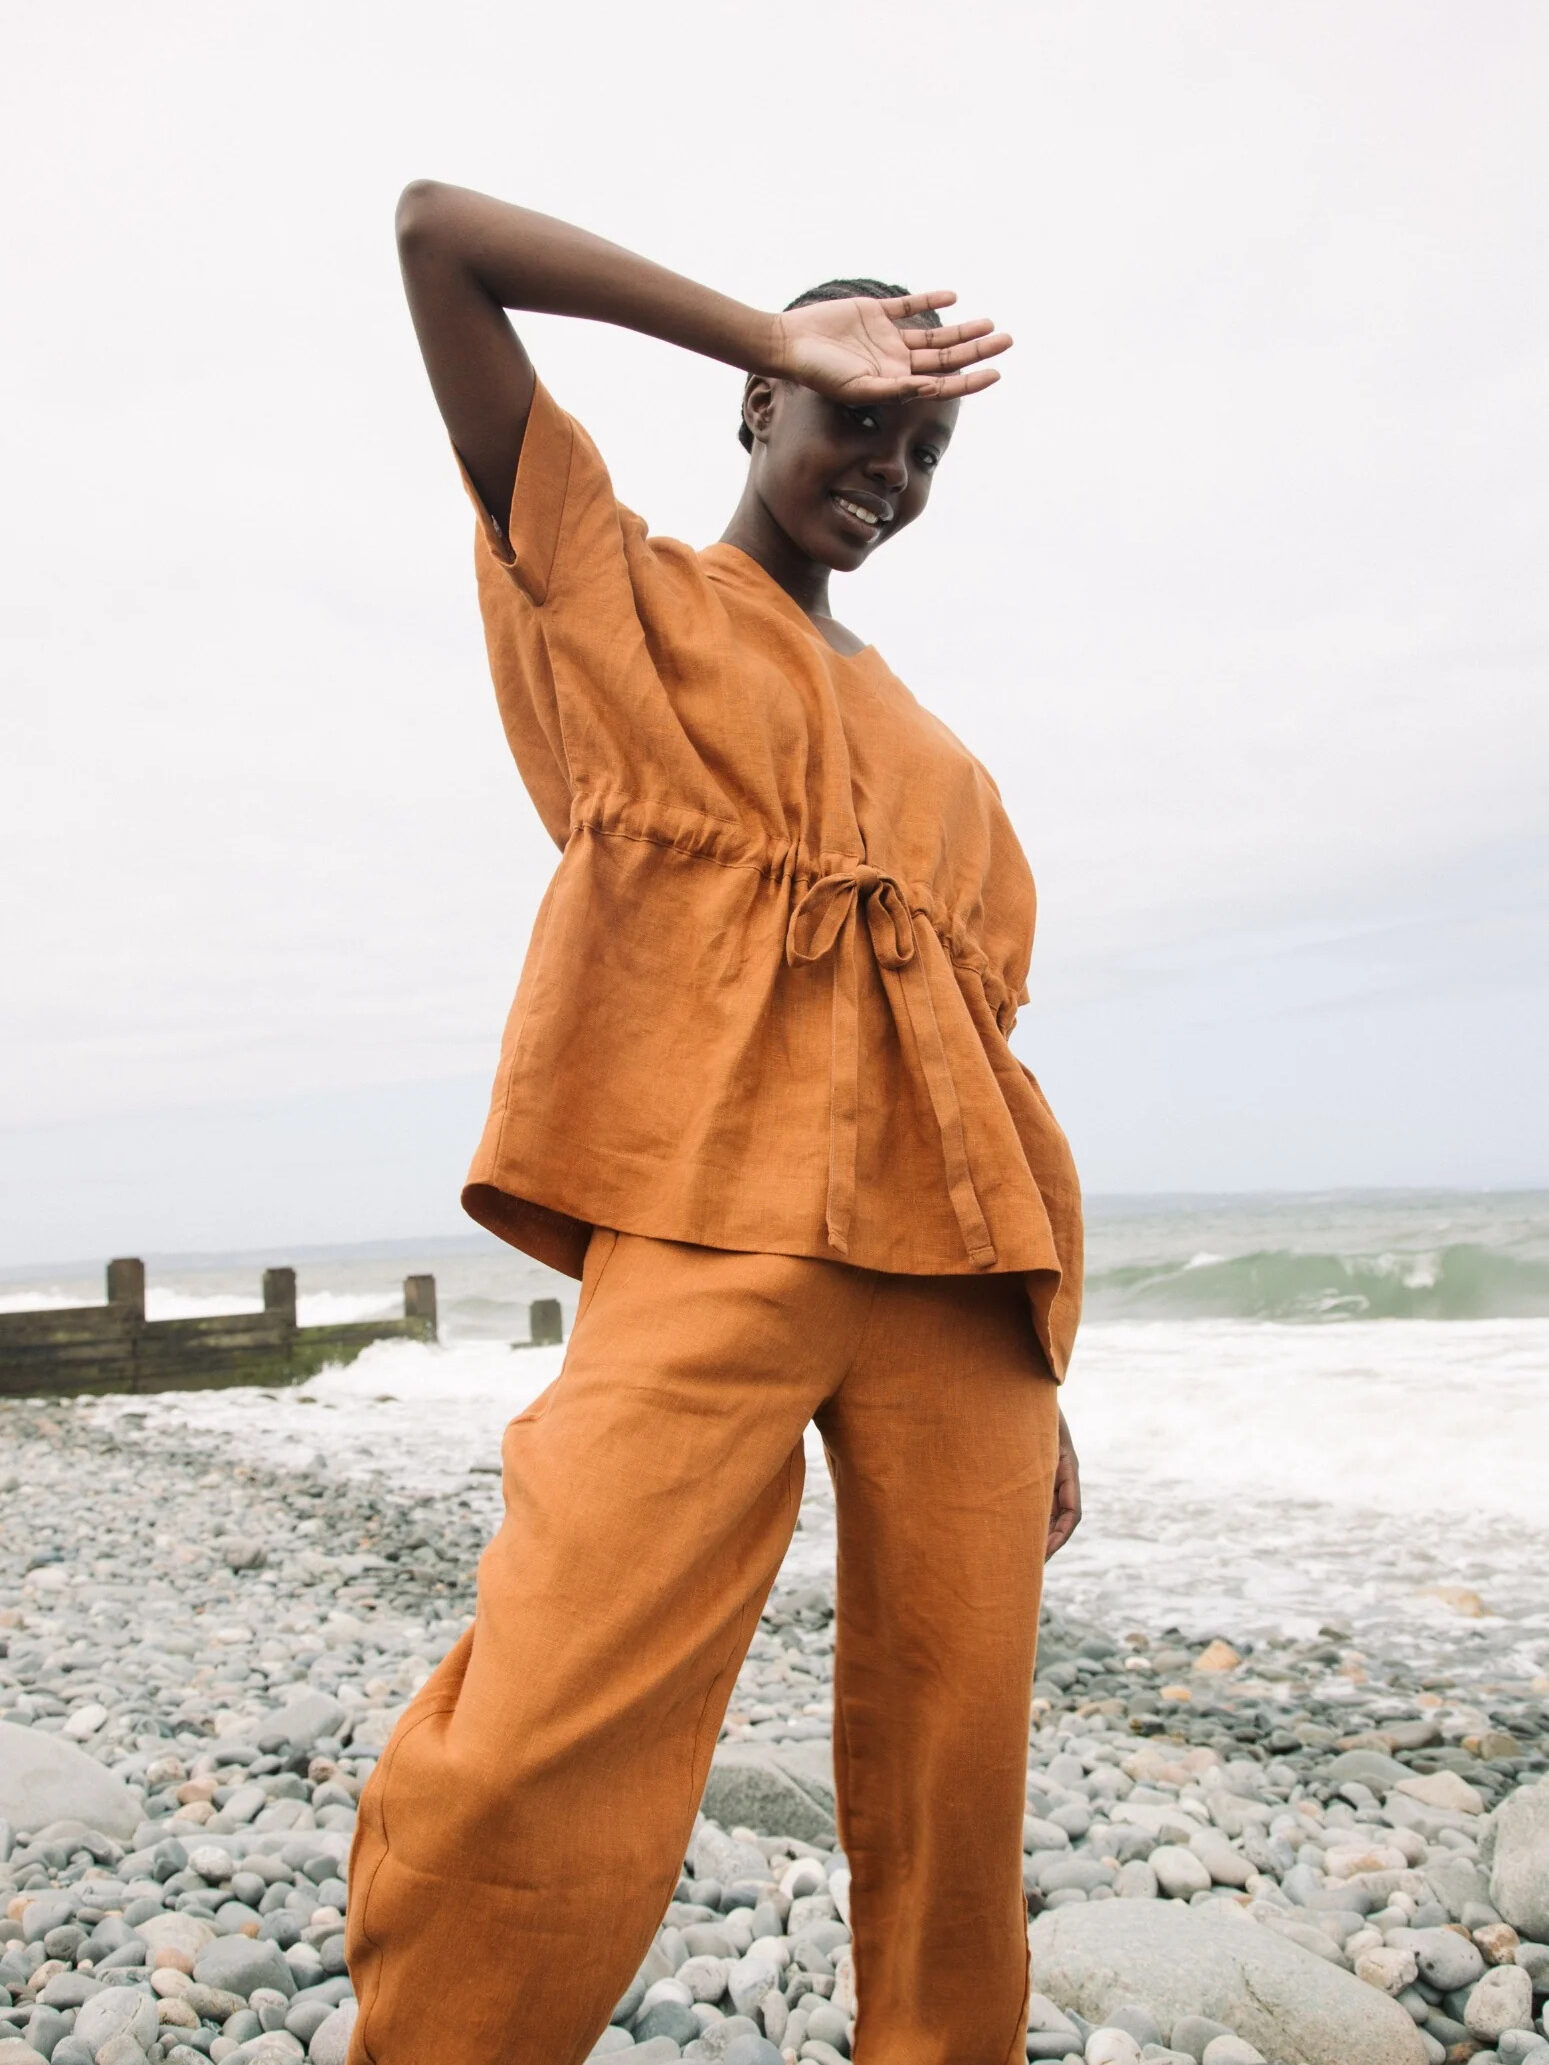 A woman in an orange jumpsuit standing on a beach.